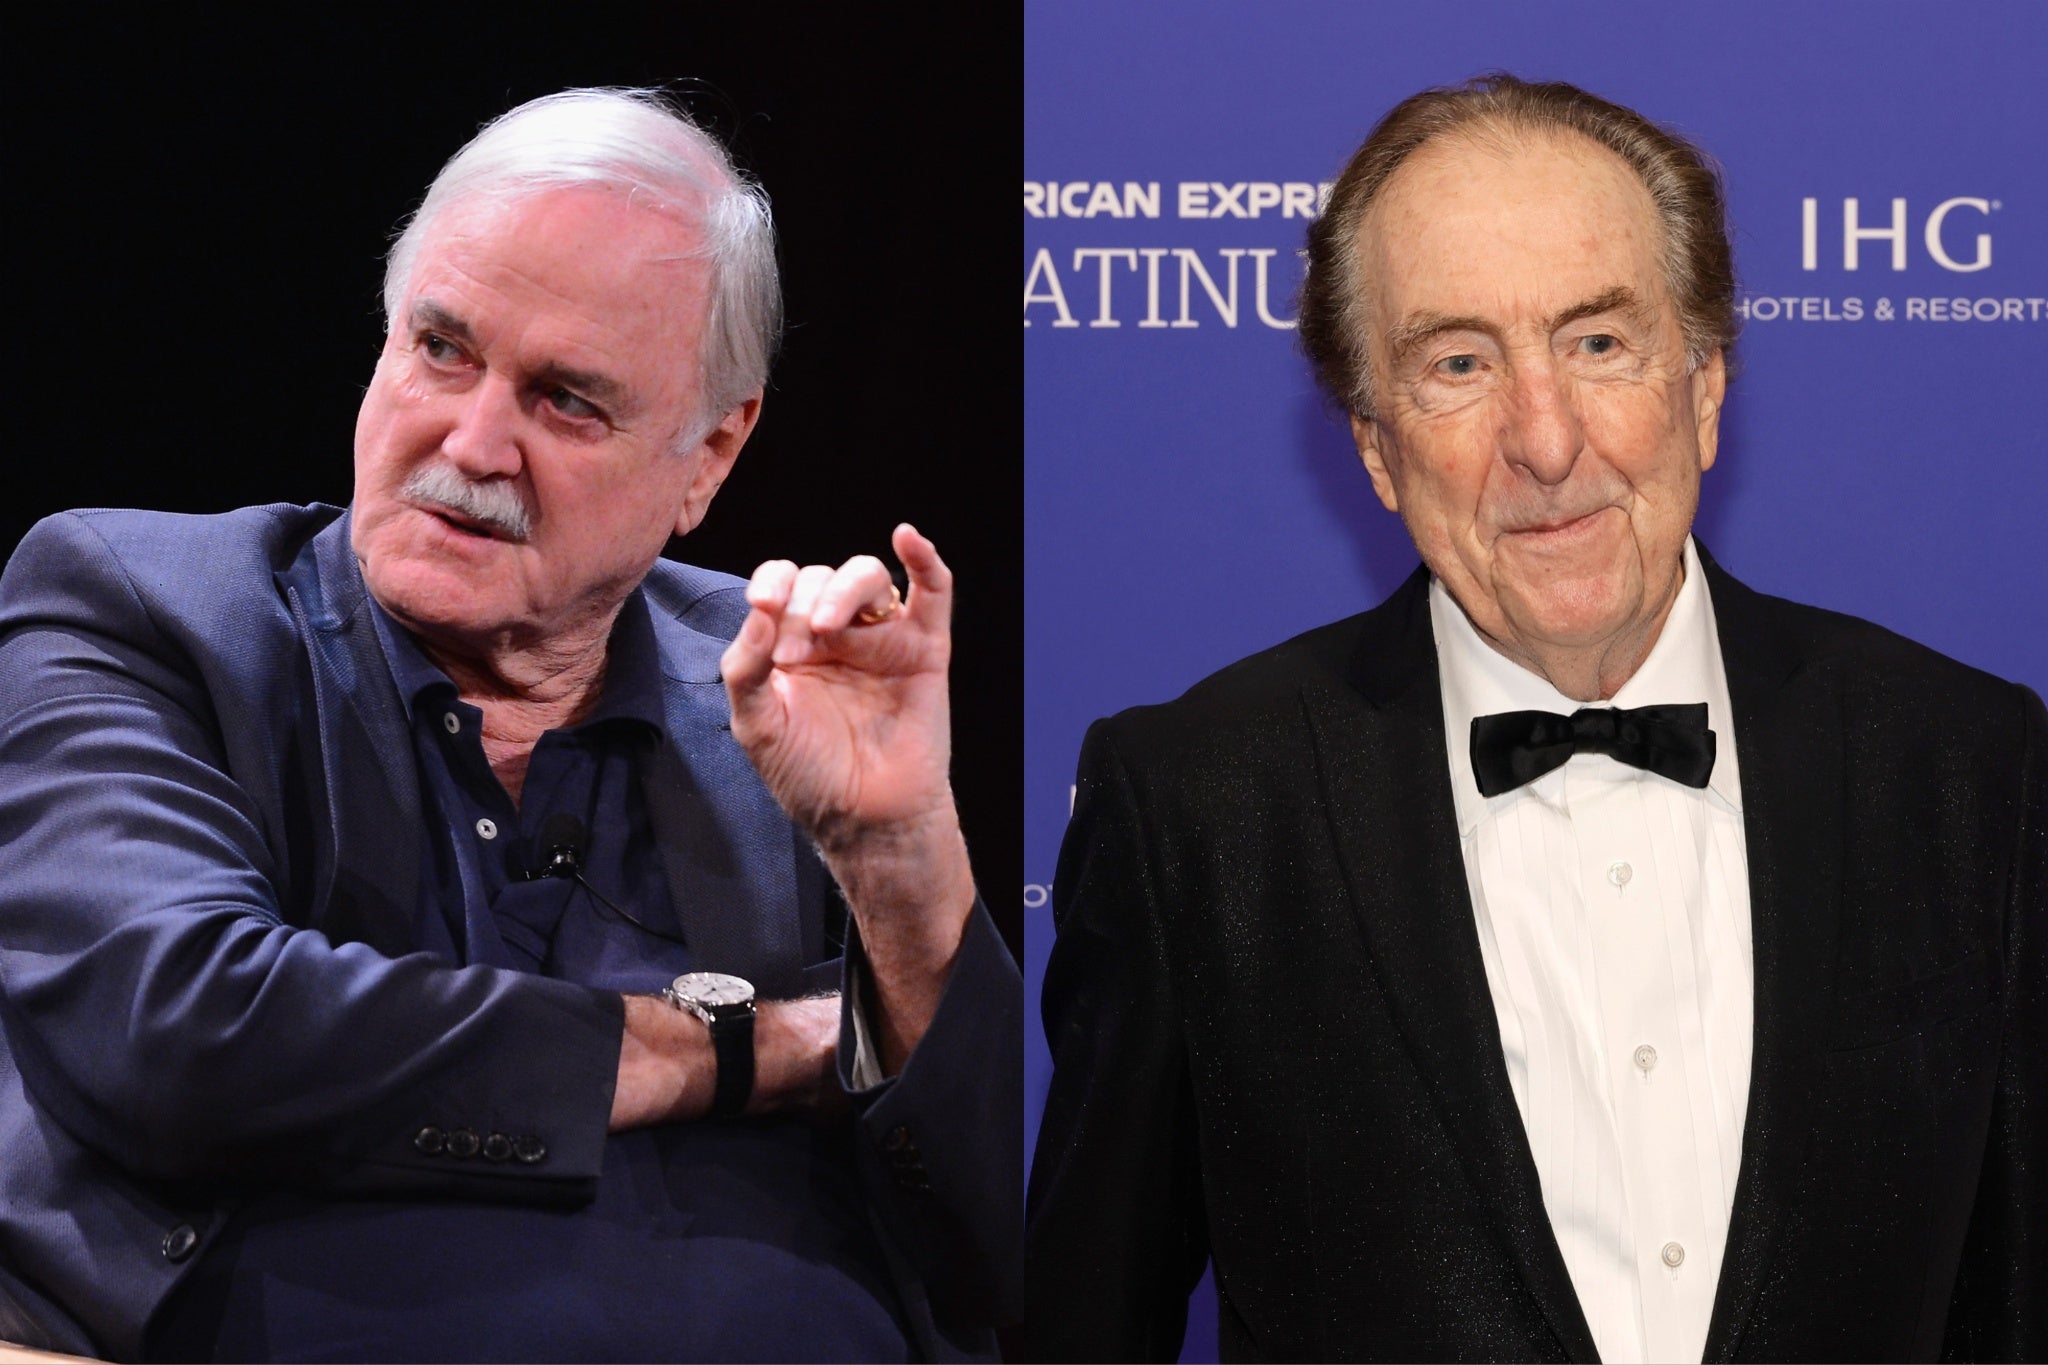 john cleese cracks joke at expense of monty python co-star eric idle: ‘we always loathed each other’